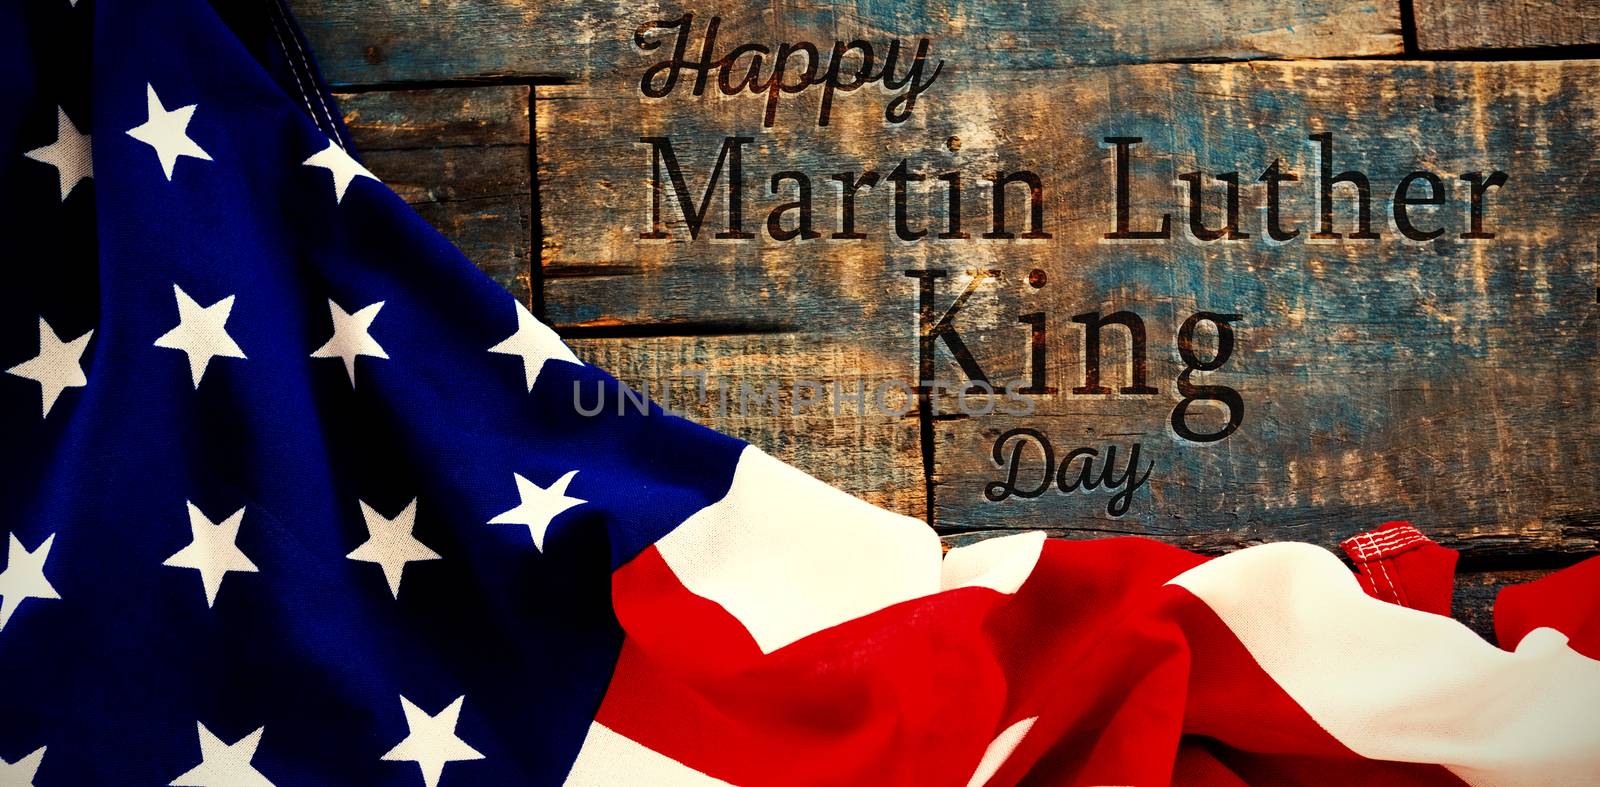 happy Martin Luther King day against american flag on a wooden table